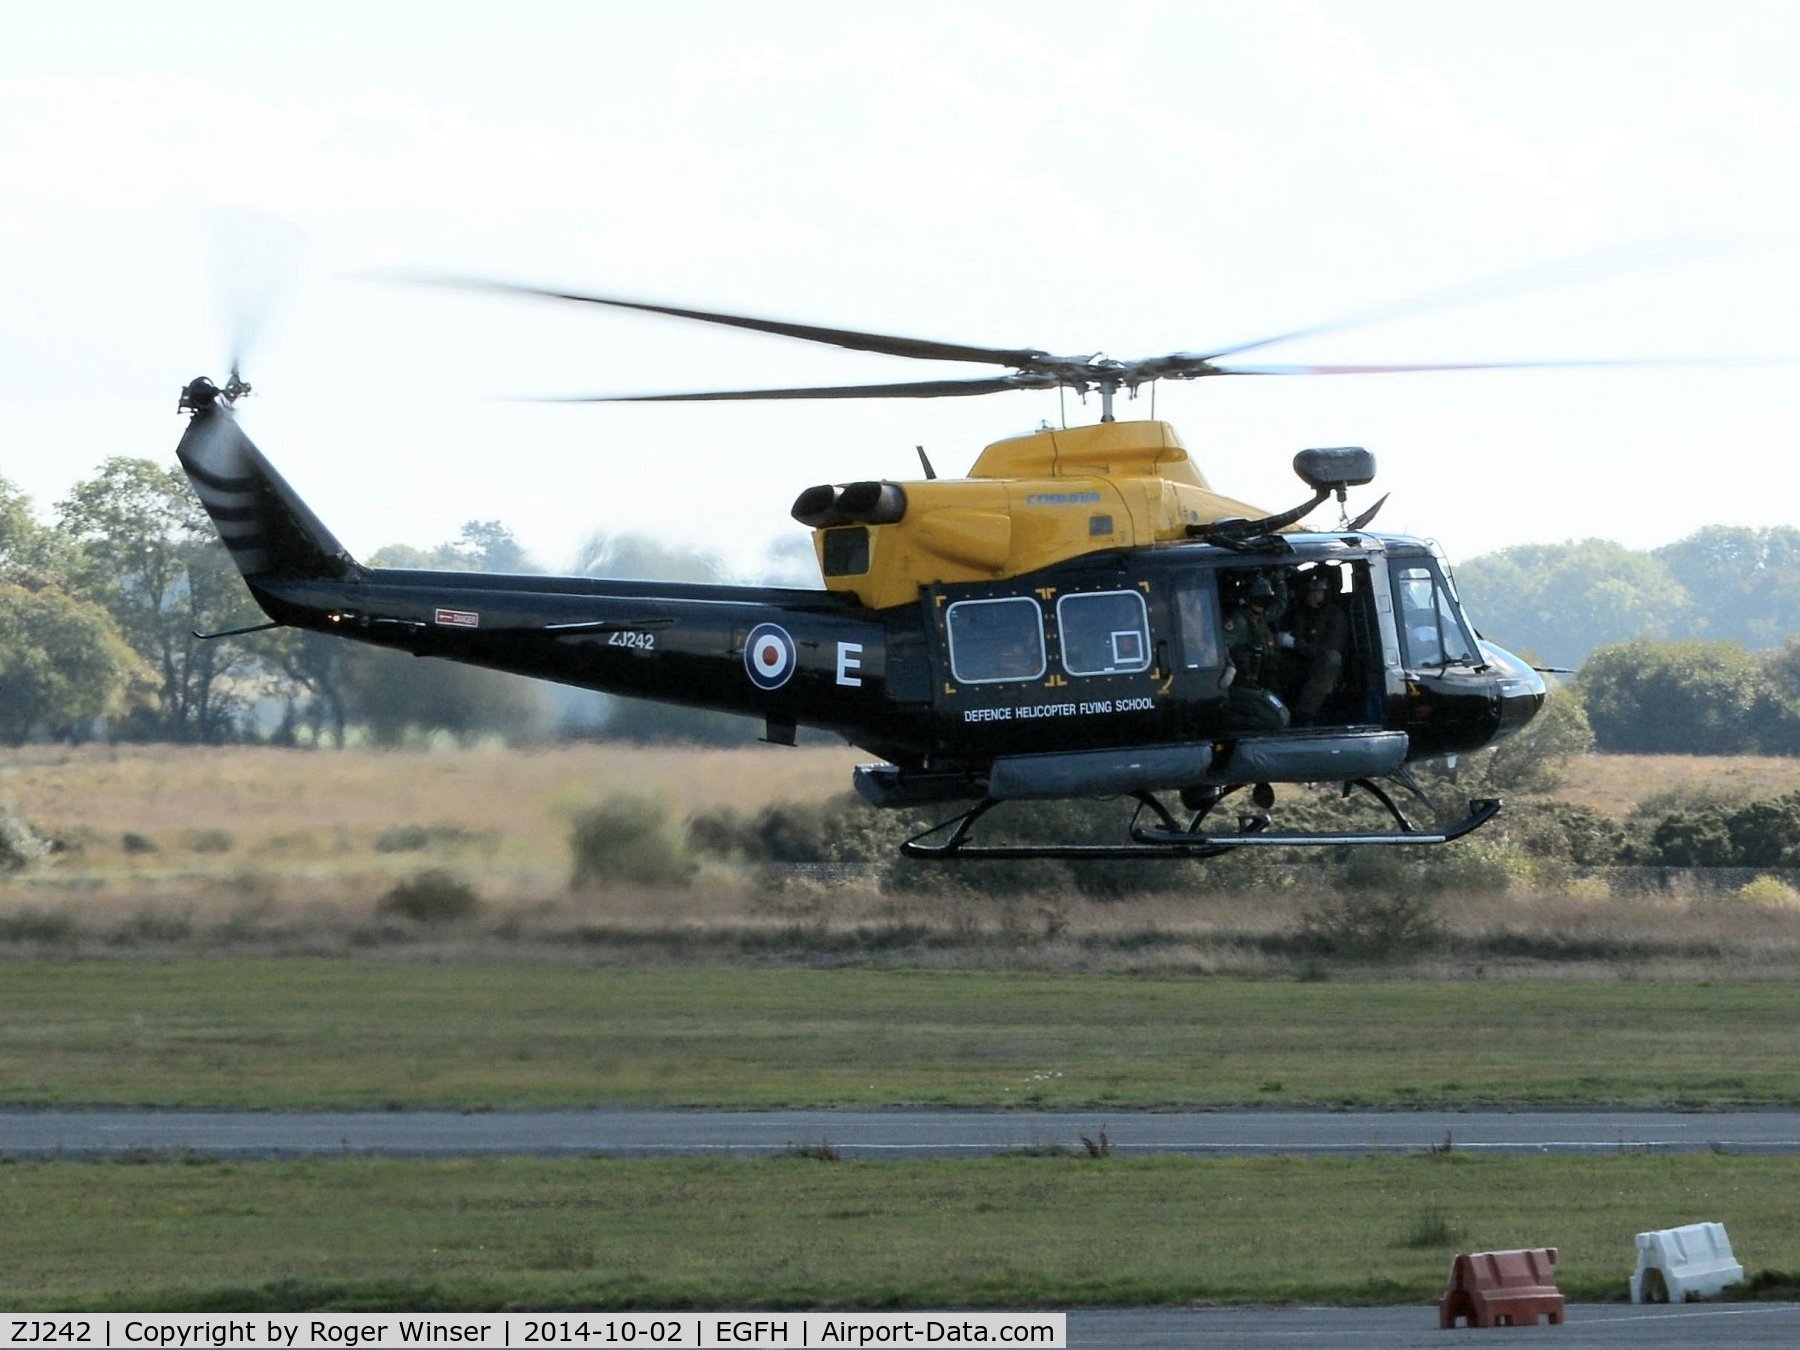 ZJ242, 1994 Bell 412EP Griffin HT1 C/N 36095, Vising Griffin helicopter coded E of 60 (R) squadron RAF departing.